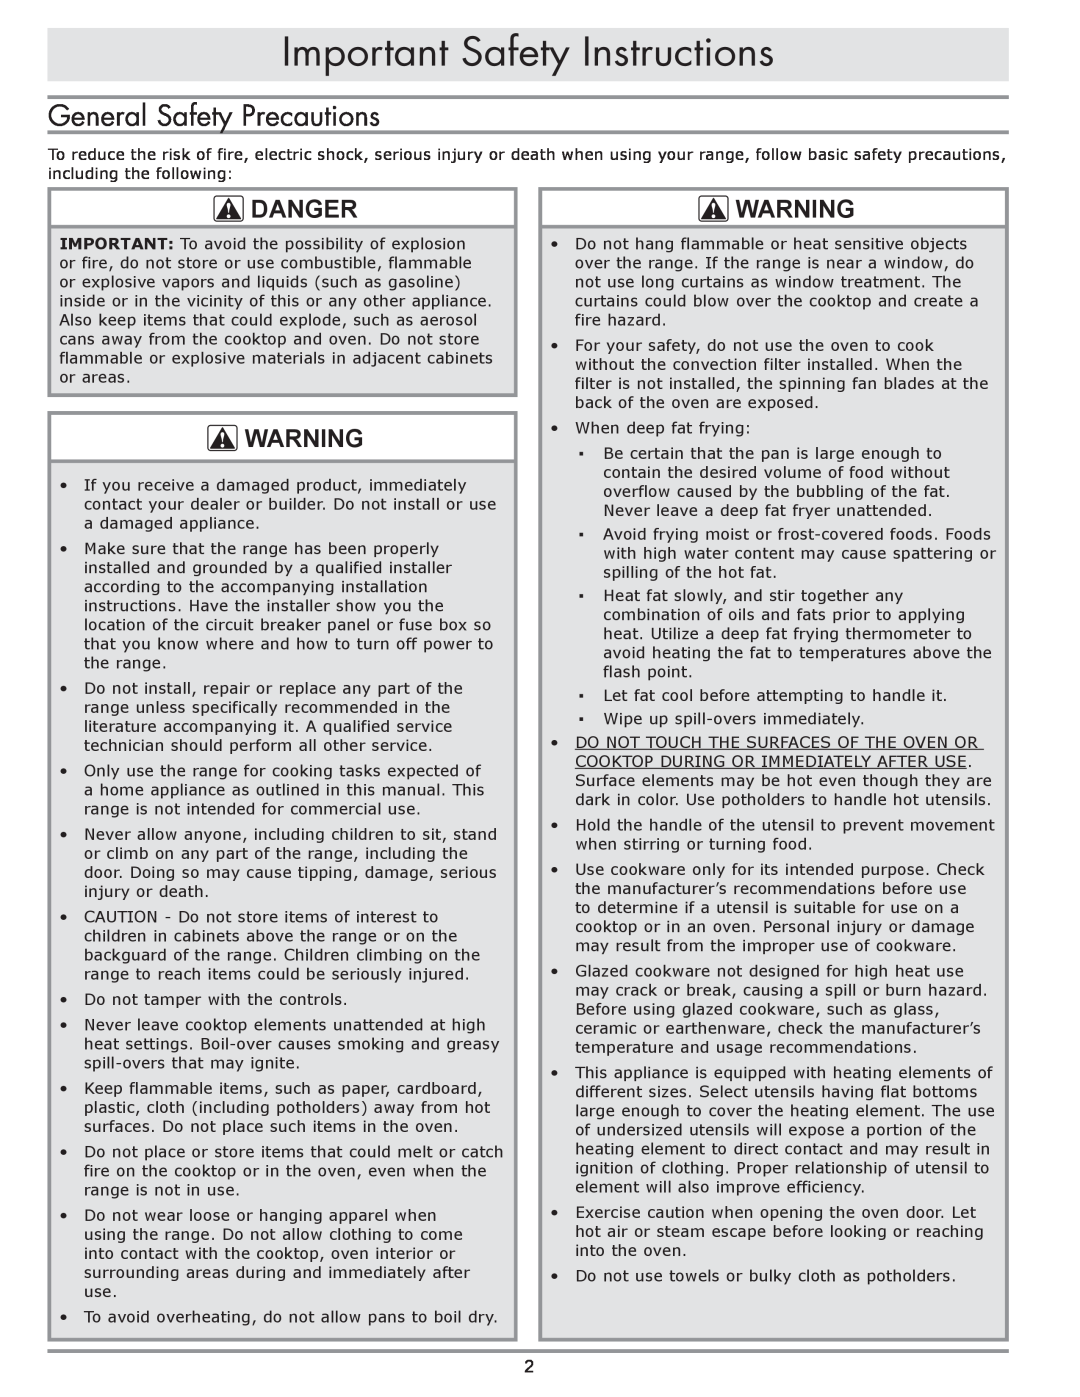 Dacor dacor important safety instructions General Safety Precautions, Important Safety Instructions, danger 